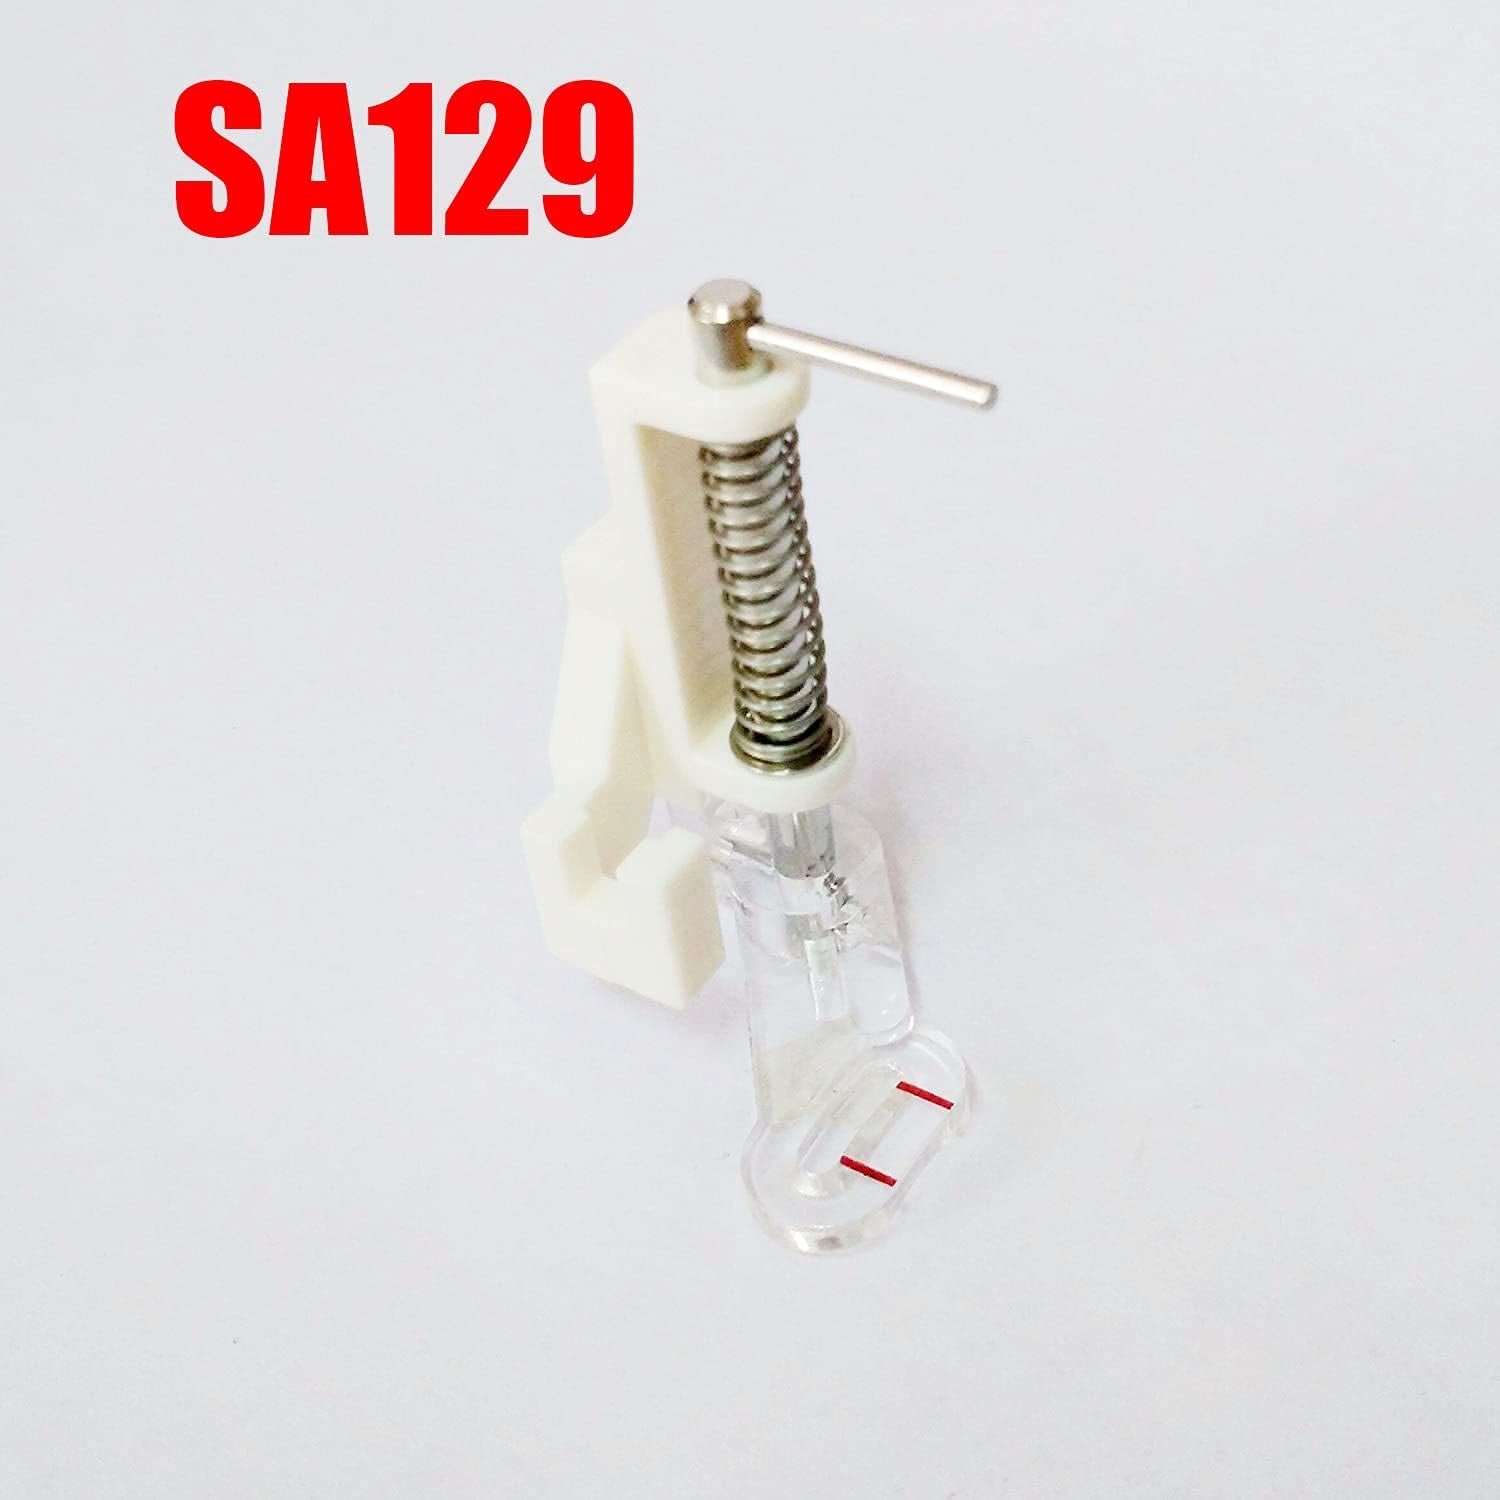 3Pcs Low Shank Free Motion Darning Foot Compatible with Singer,Brother, Babylock, Janome, Elna, Kenmore,Bernette,White and Many Domestic Low Shank Sewing Machines